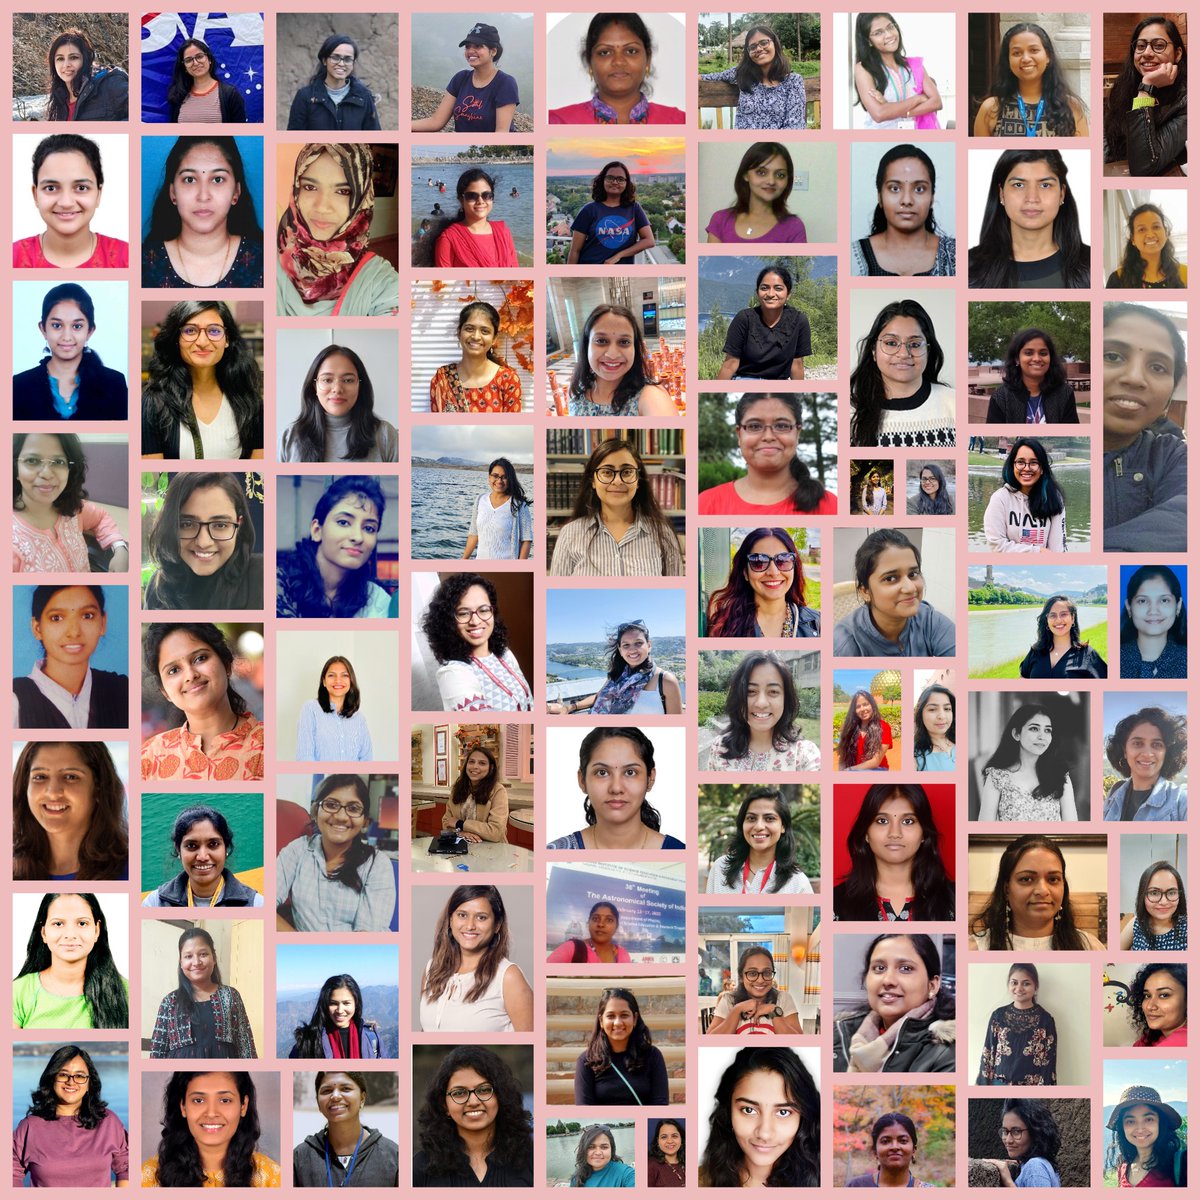 INDUS honors the remarkable #INDUS women and brilliant minds shaping the future of #SolarPhysics with their dedication, expertise, and global impact. Happy International Women's Day to these inspiring Indian women! #WomenInSTEM #WomensDay 👩‍🔬🥼🔭📡🌞
@asipoec @IndiaDST